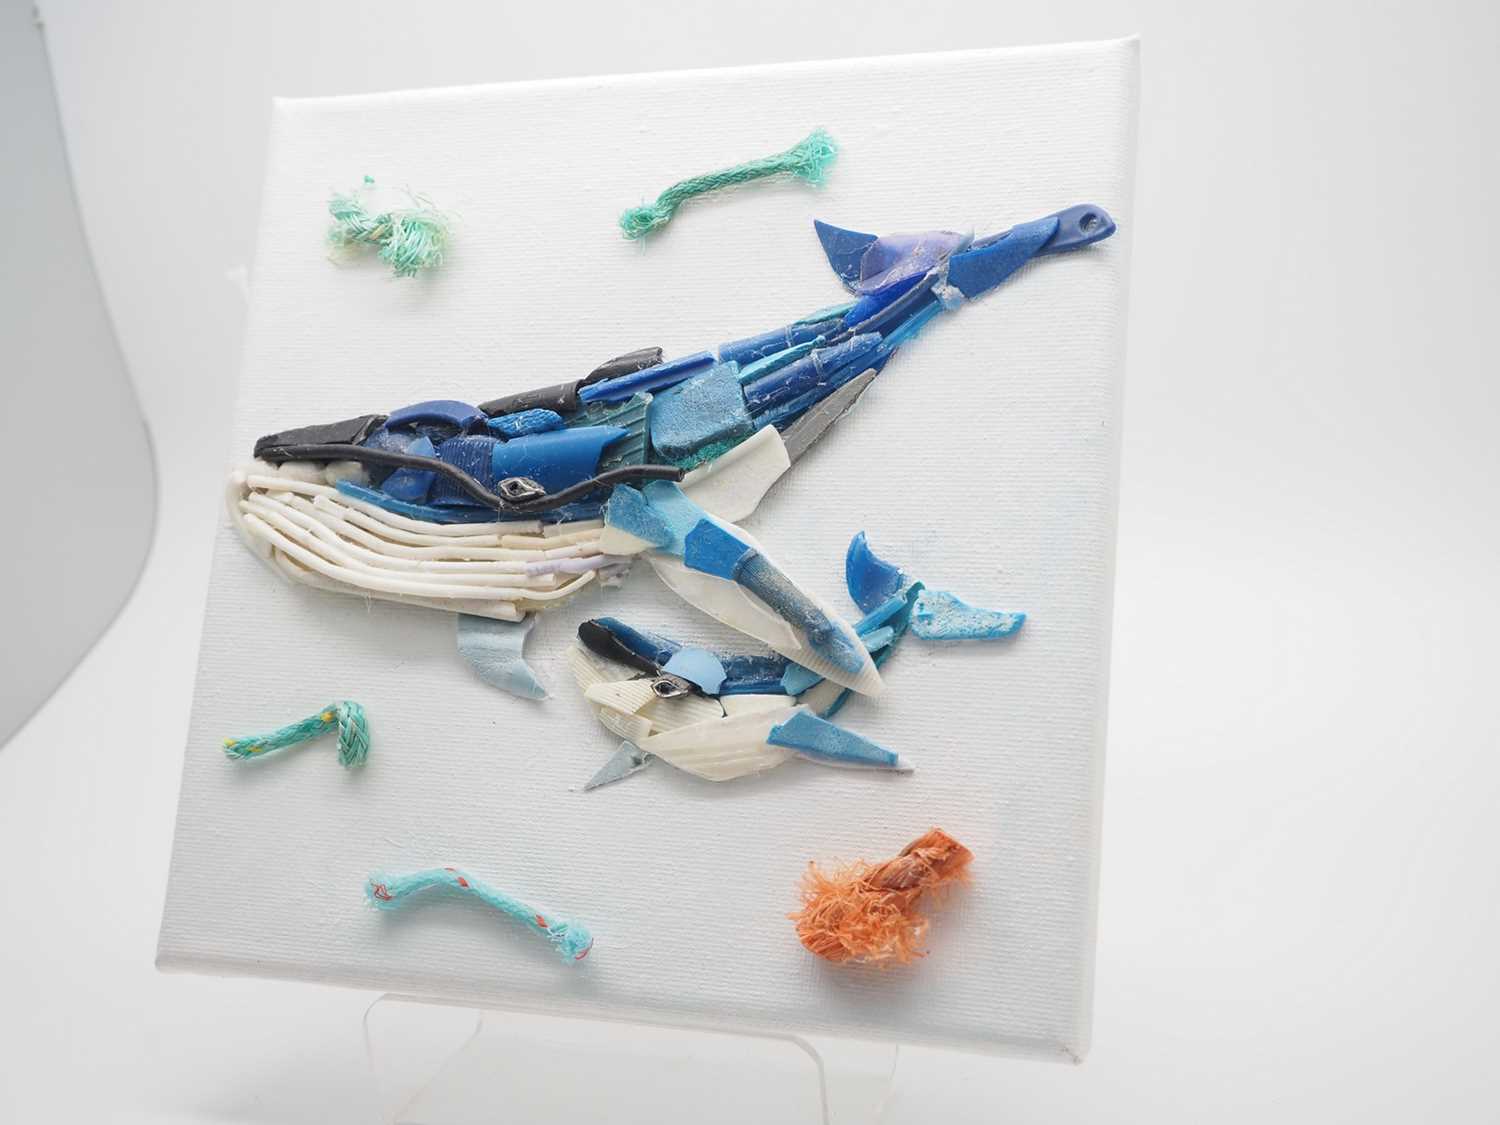 Emily Shaw -'CLEAN OUR SEAS' - created using litter found at sea on canvas - 8" x 8" - PROVENANCE: - Image 2 of 2